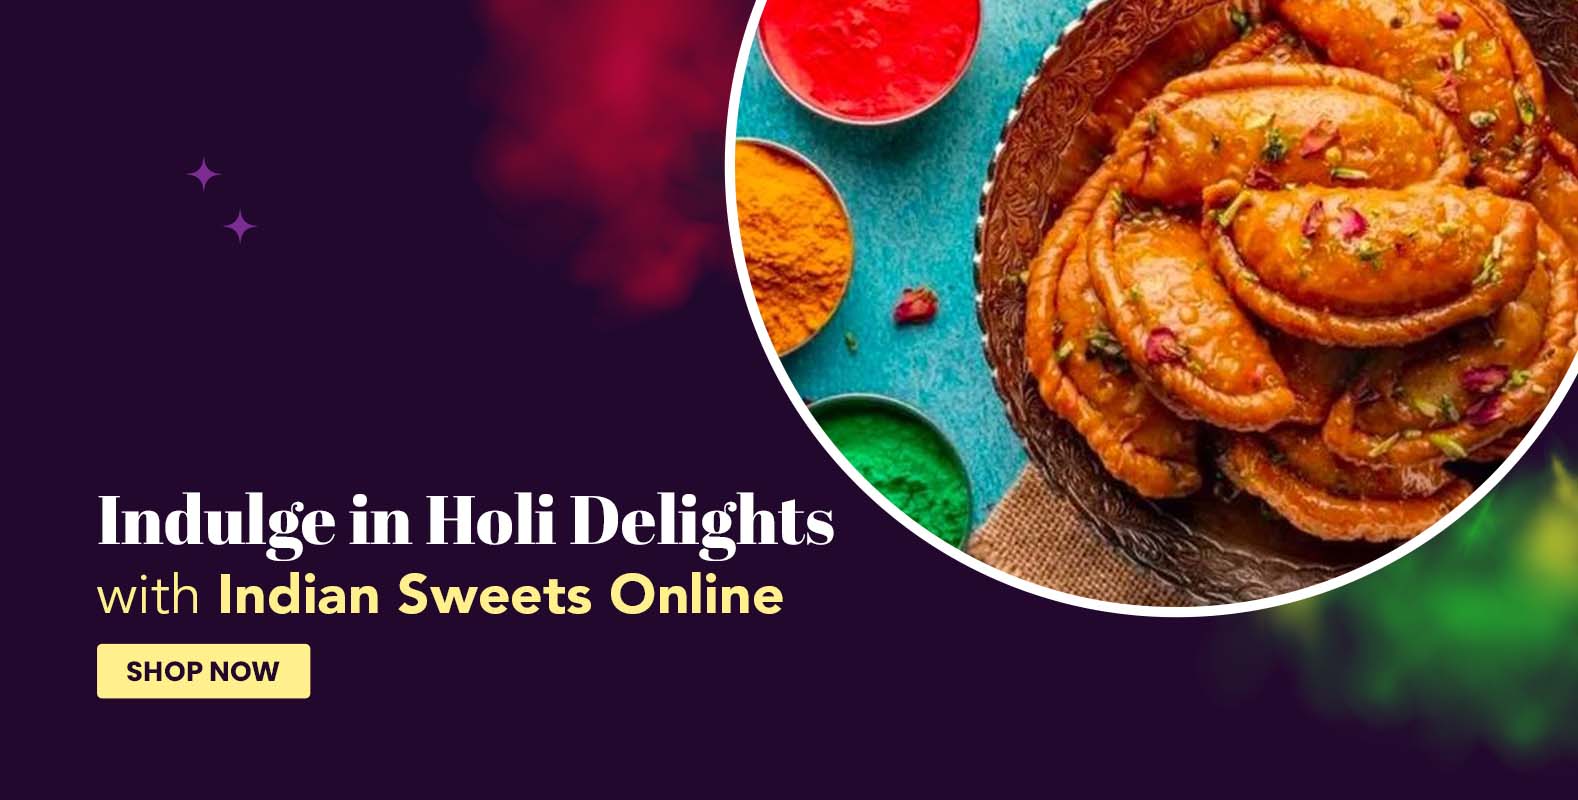 Holi with Indian Sweets Online